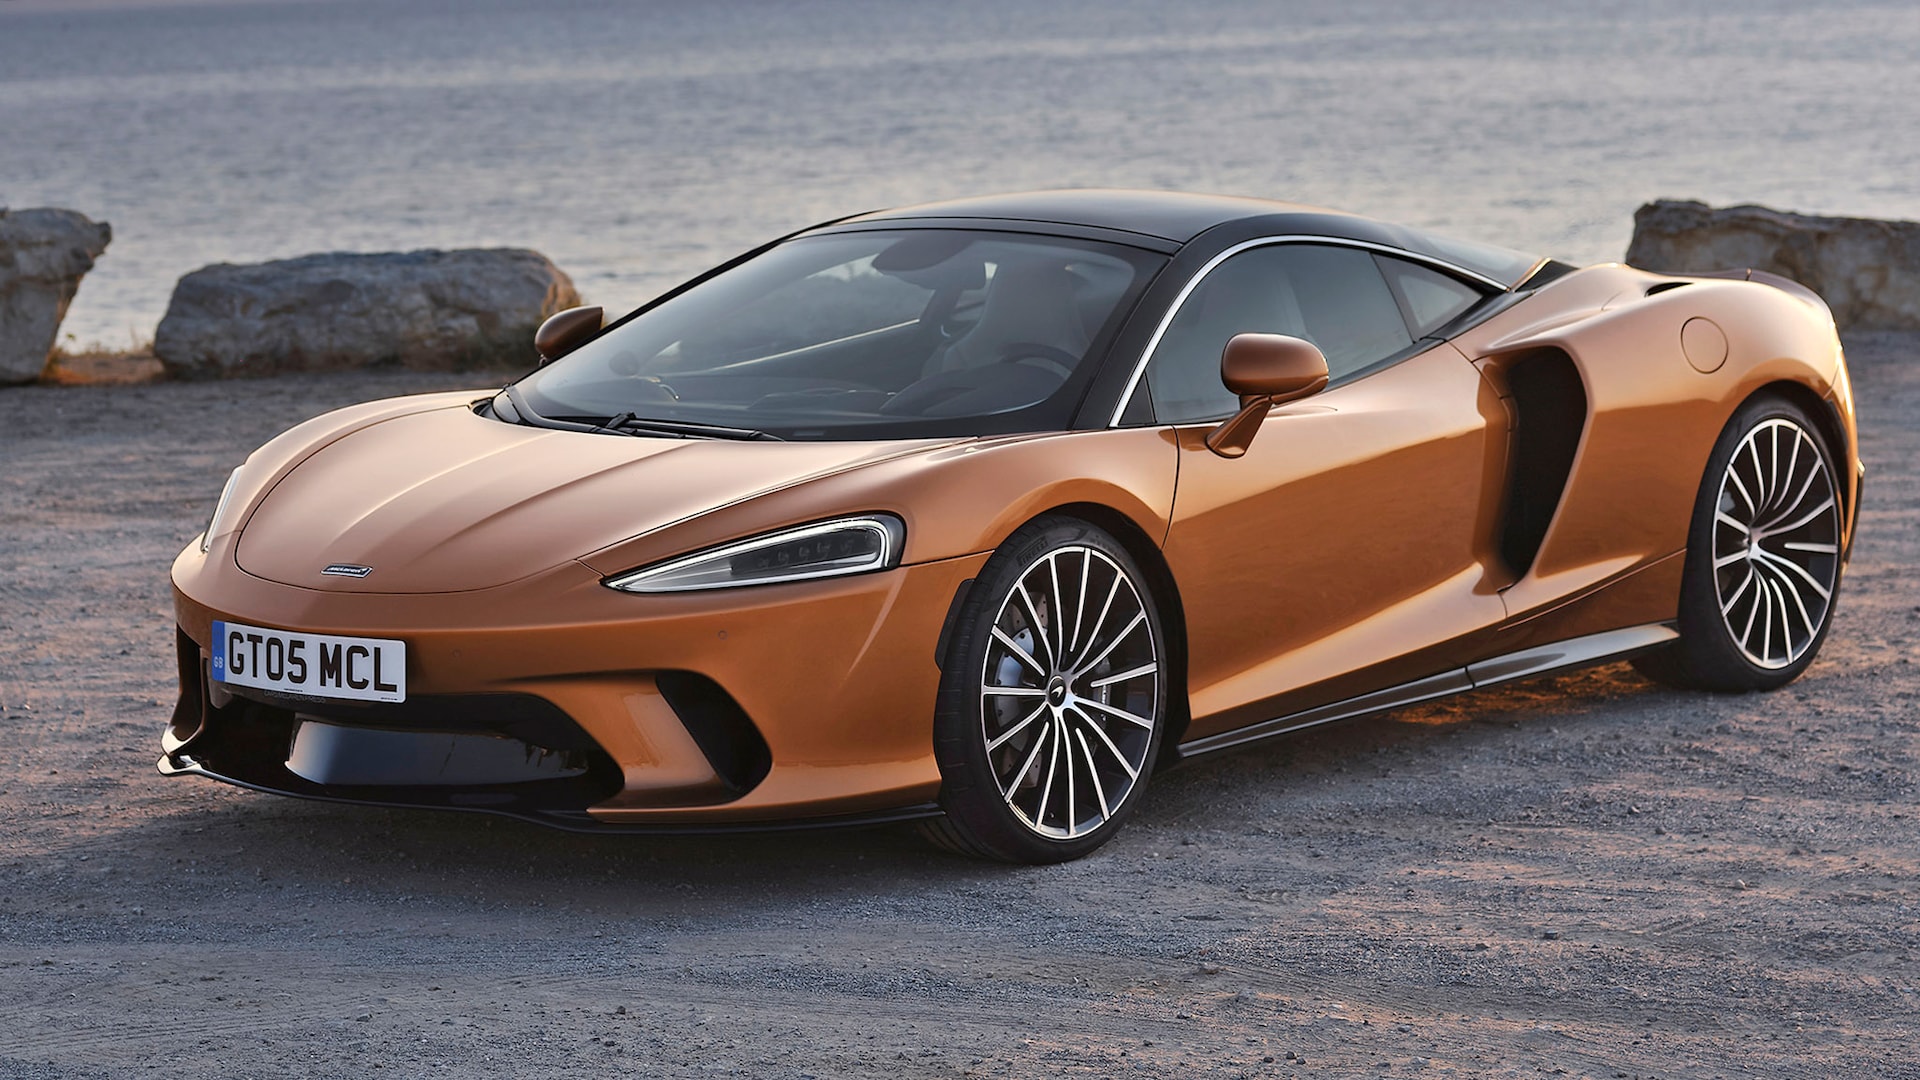 2022 McLaren GT Prices, Reviews, and Photos - MotorTrend